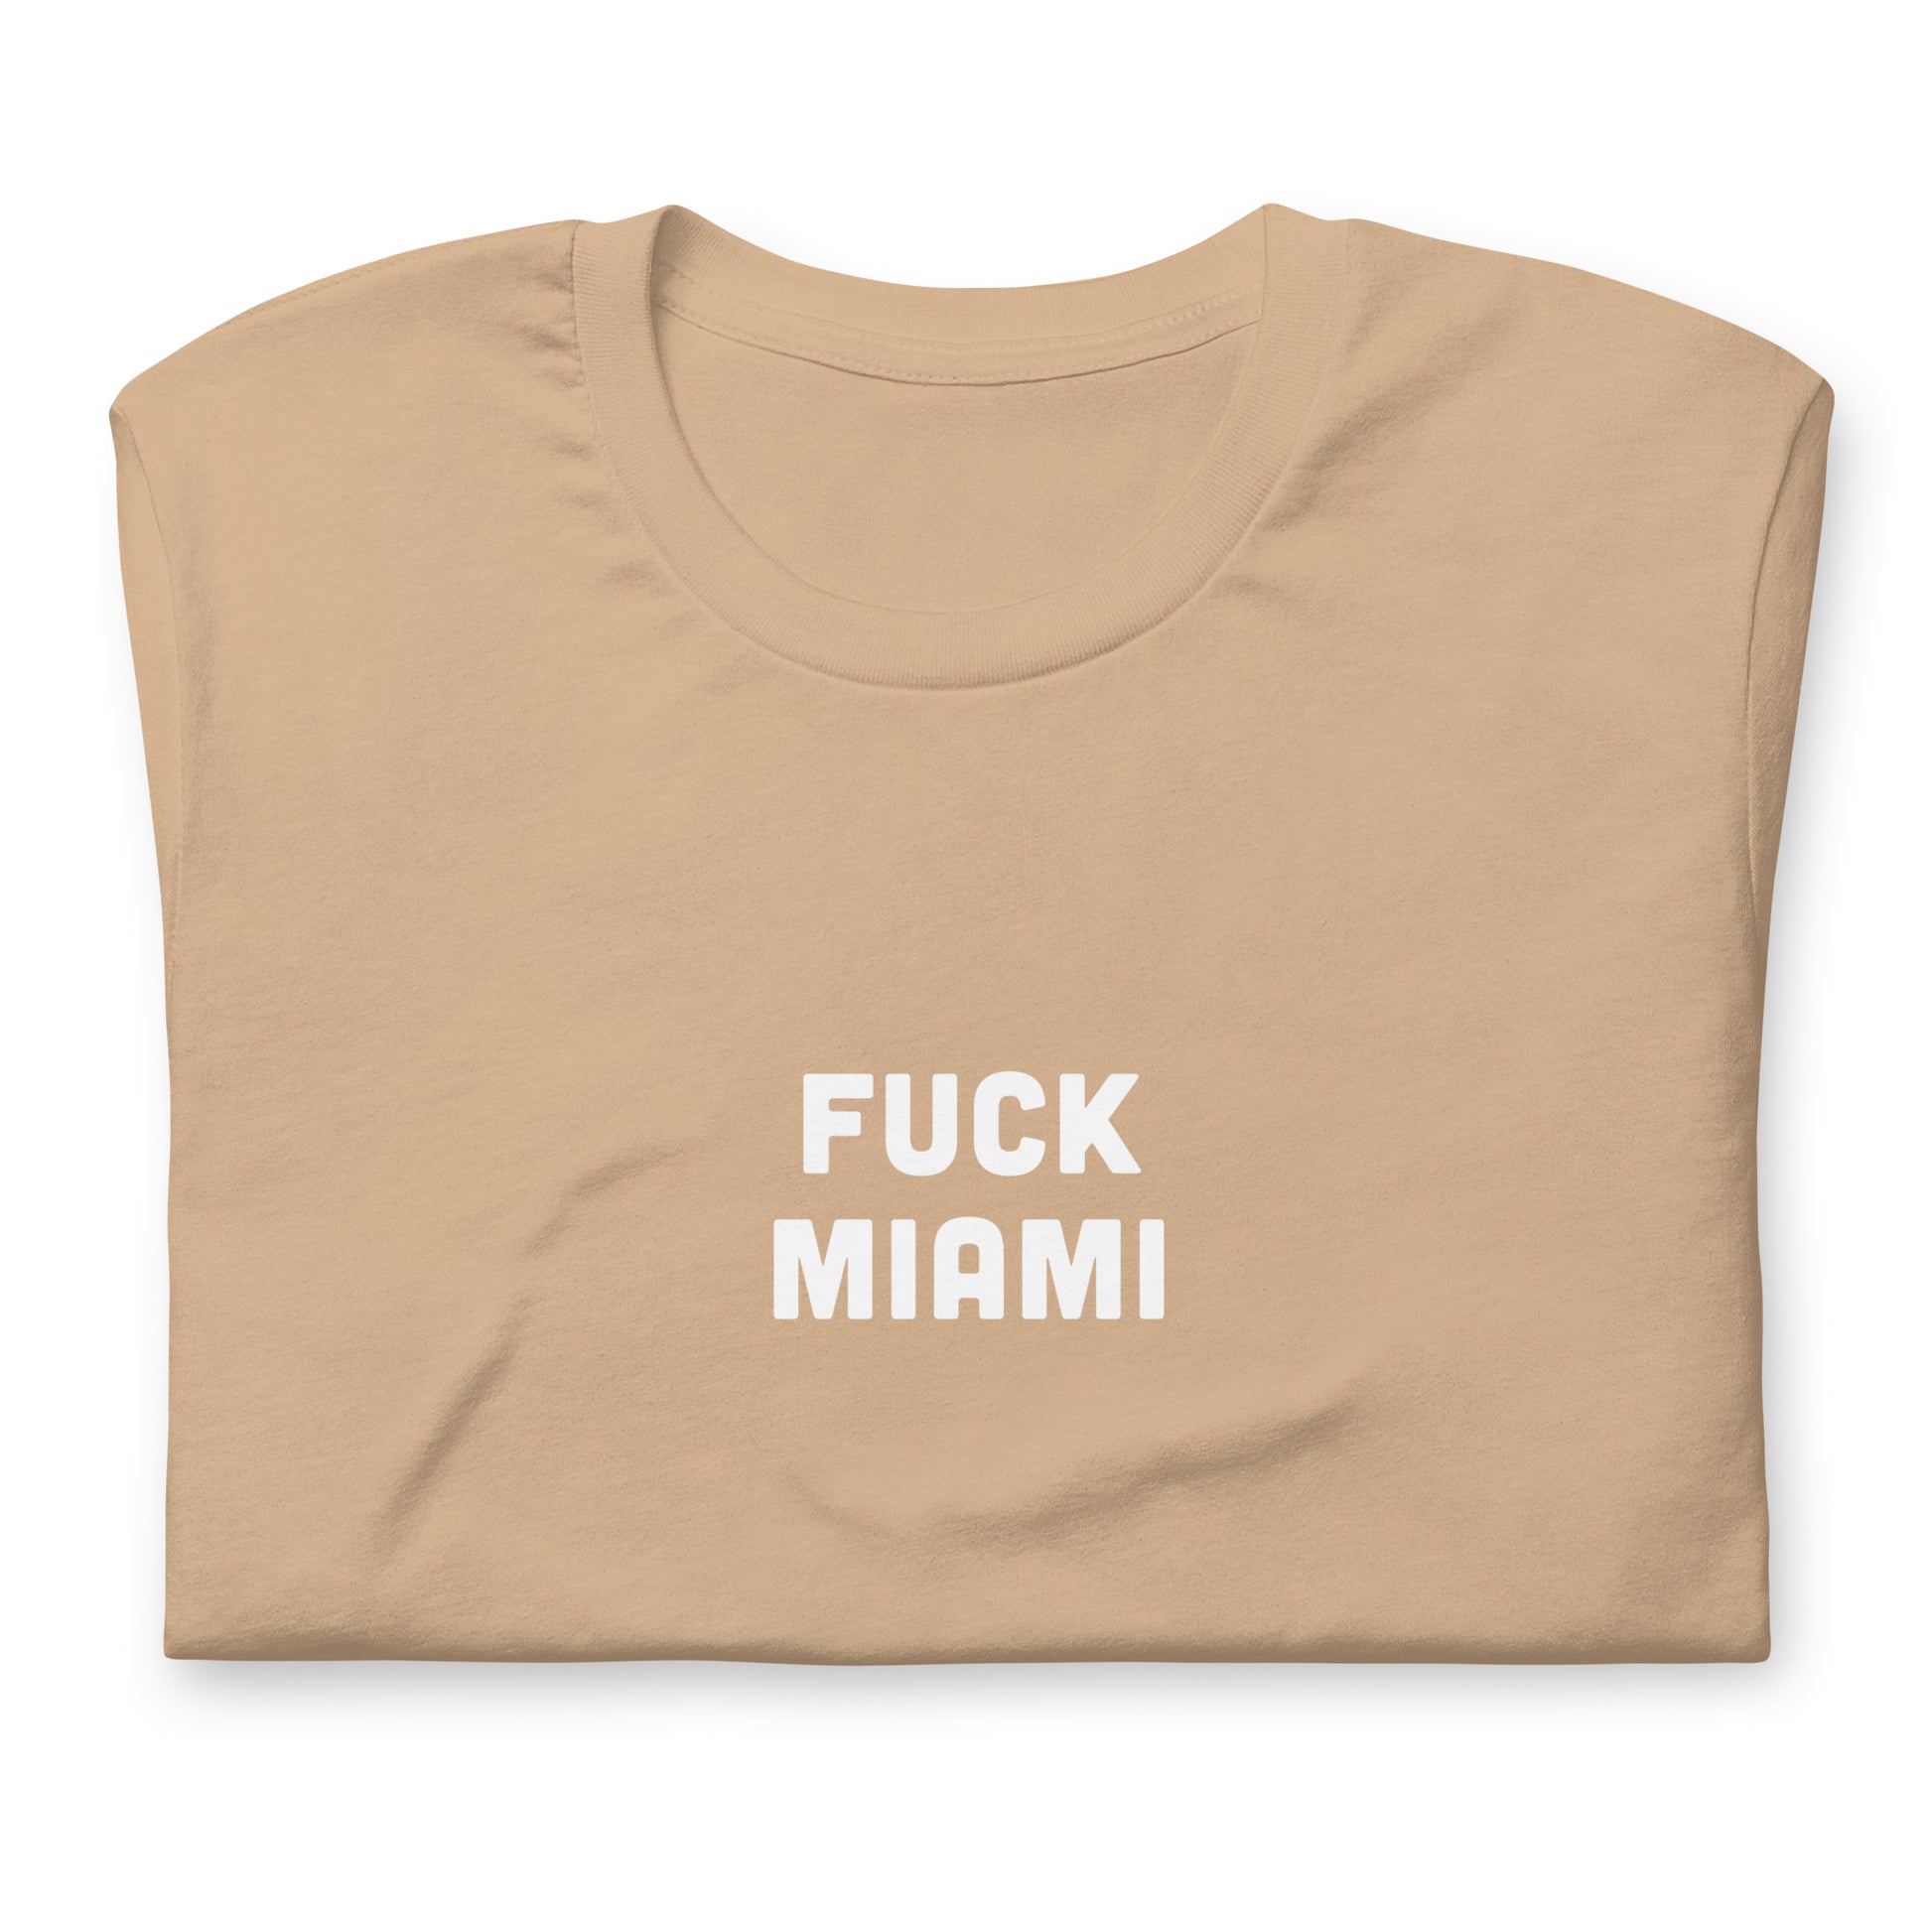 Fuck Miami T-Shirt Size 2XL Color Forest